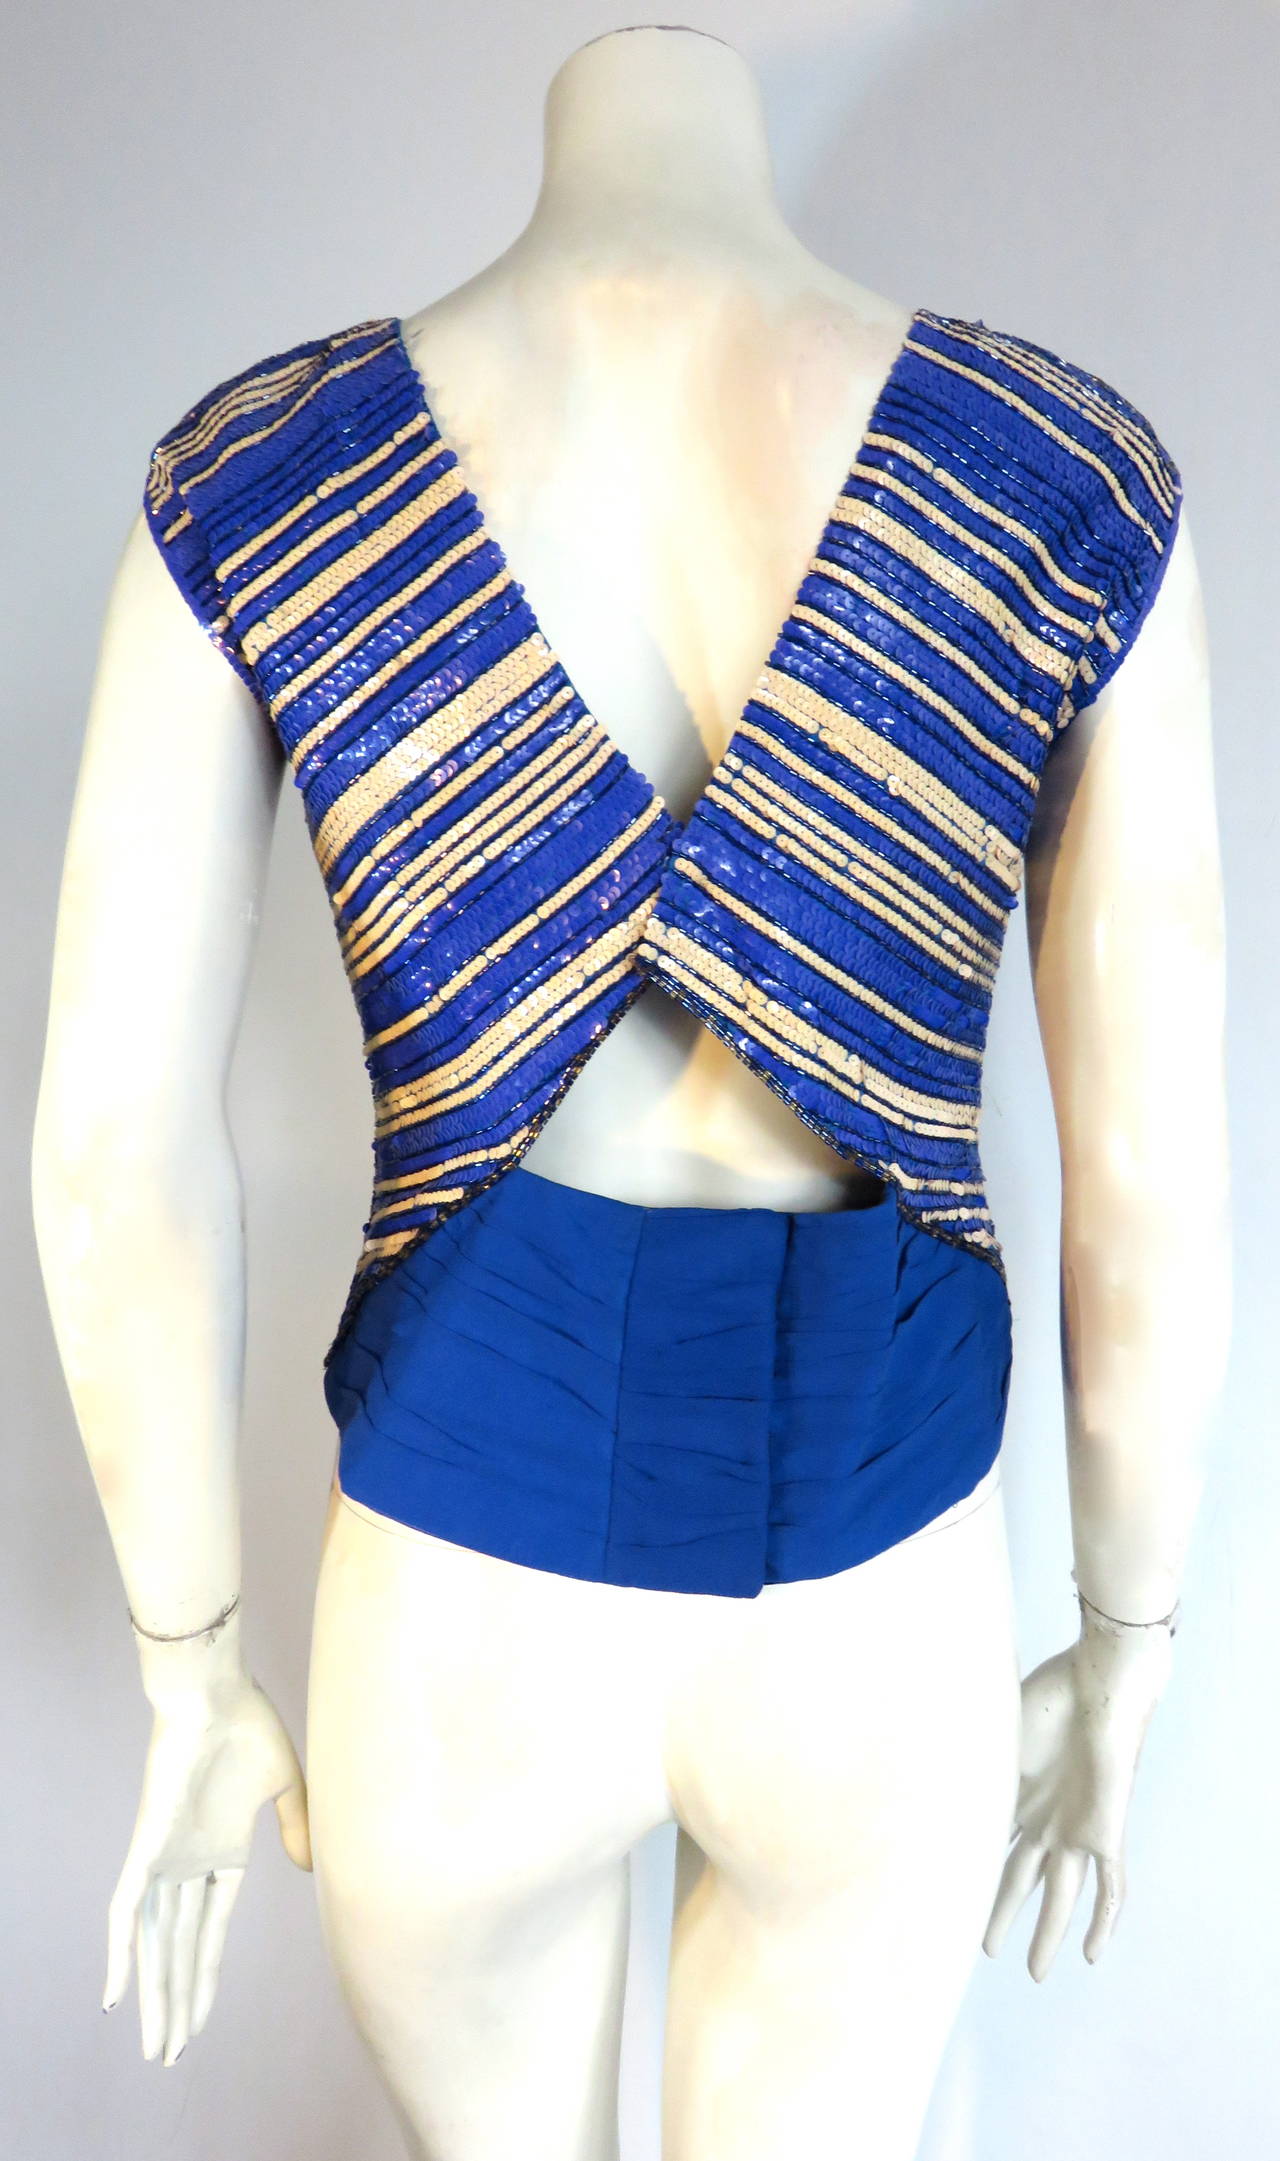 Gorgeous, 1970's CHRISTIAN DIOR Sequin & beaded evening top.

This stunning evening top features multi-striped rows of azure blue, and ivory white sequins with individual rows of hand-beaded stripes, bordering the rows of sequins.  

The